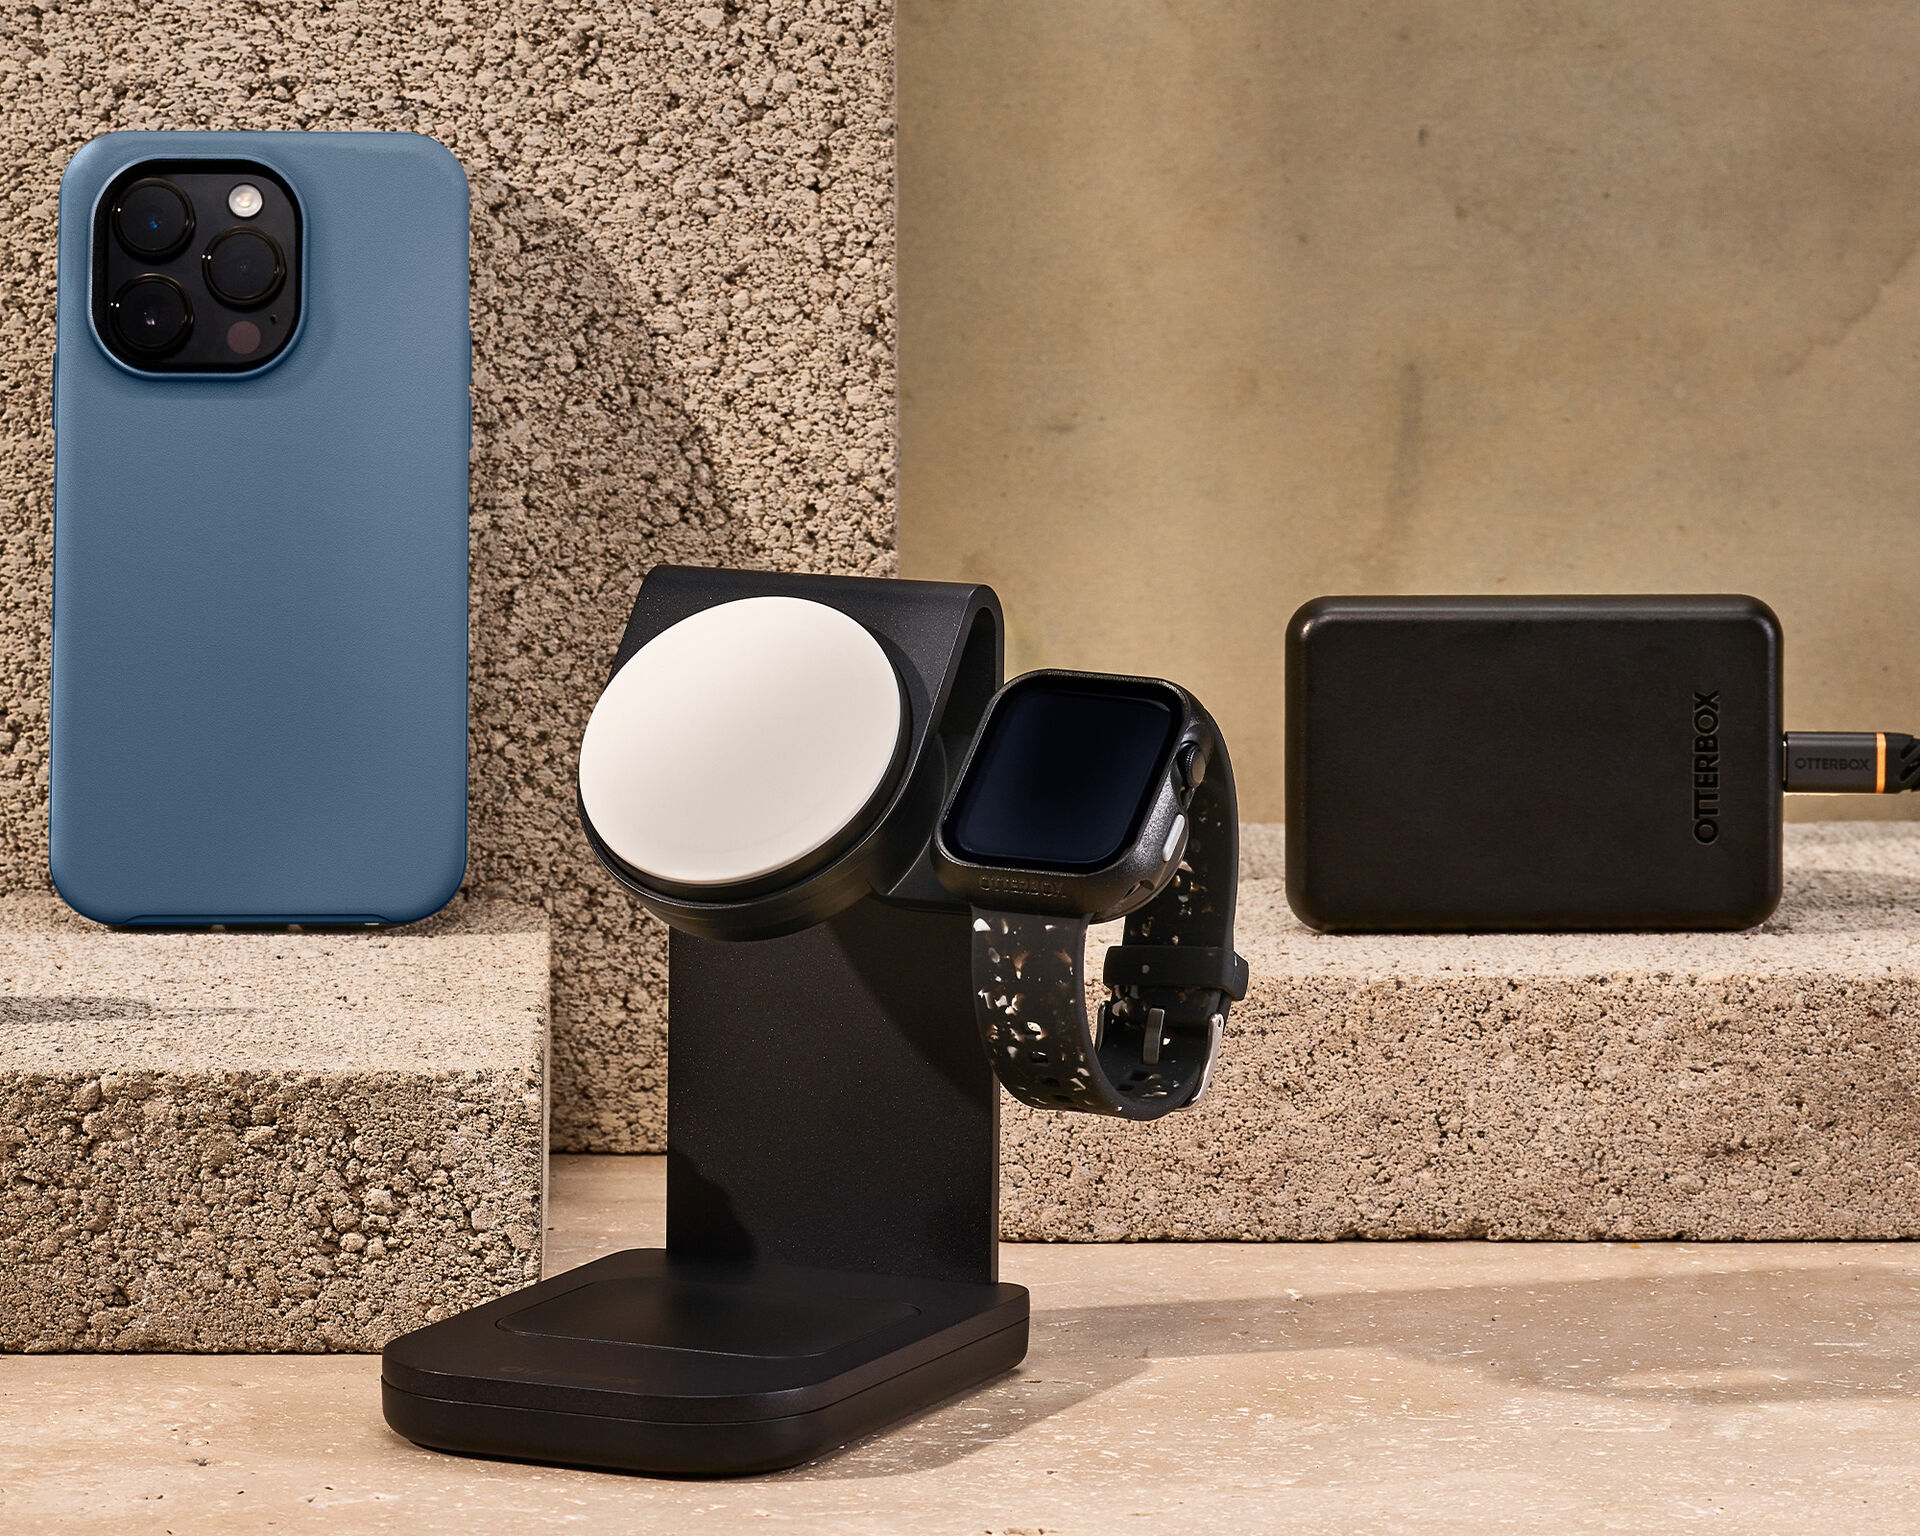 Blue case, 3-in-1 Charging Station with MagSafe with a apple watch charging, and a wall charger